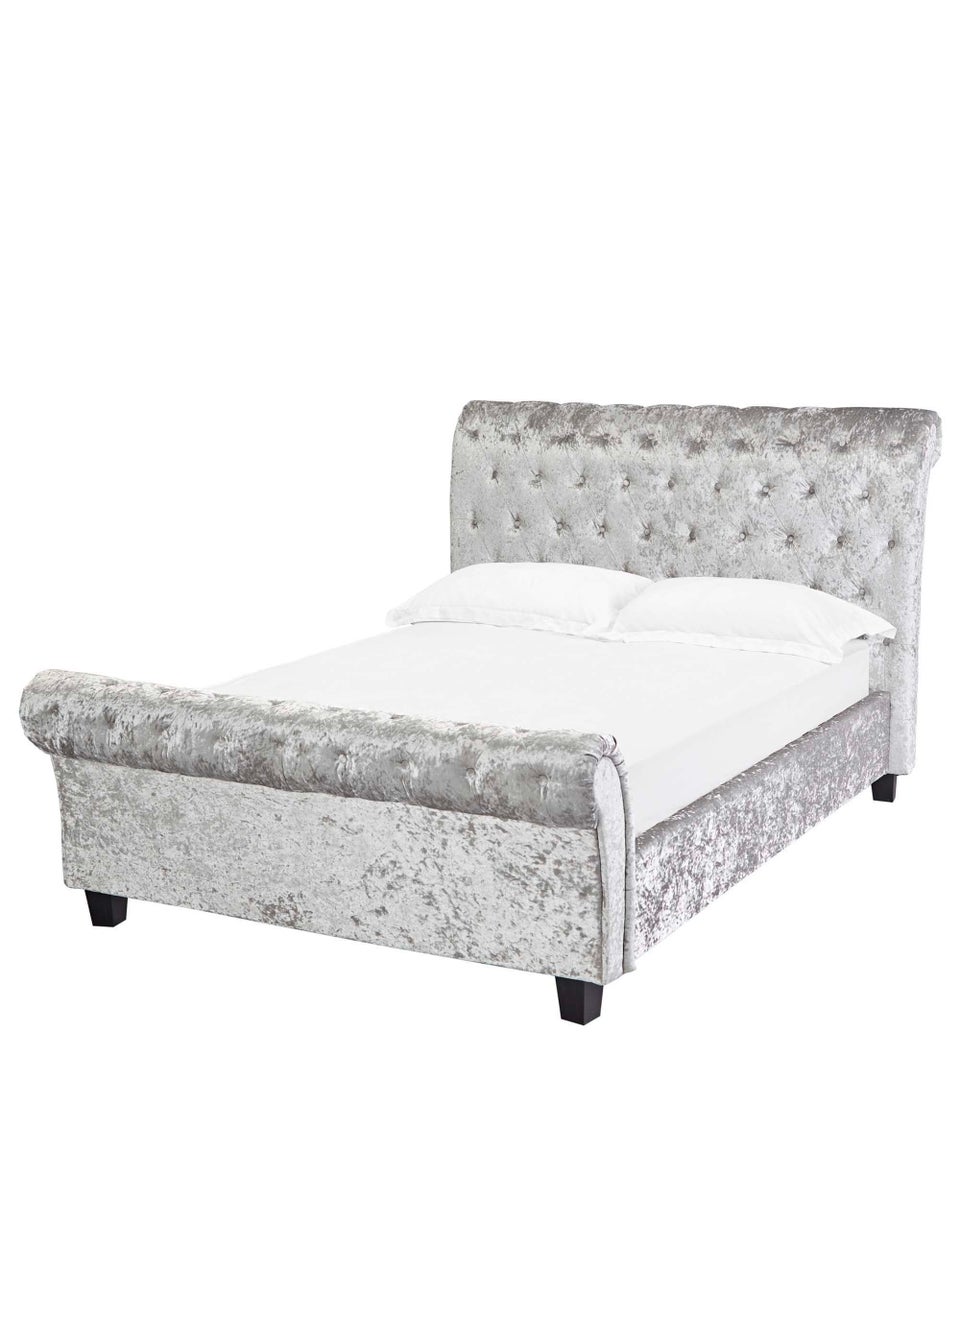 LPD Furniture Isabella 4.6 Double Bed Silver